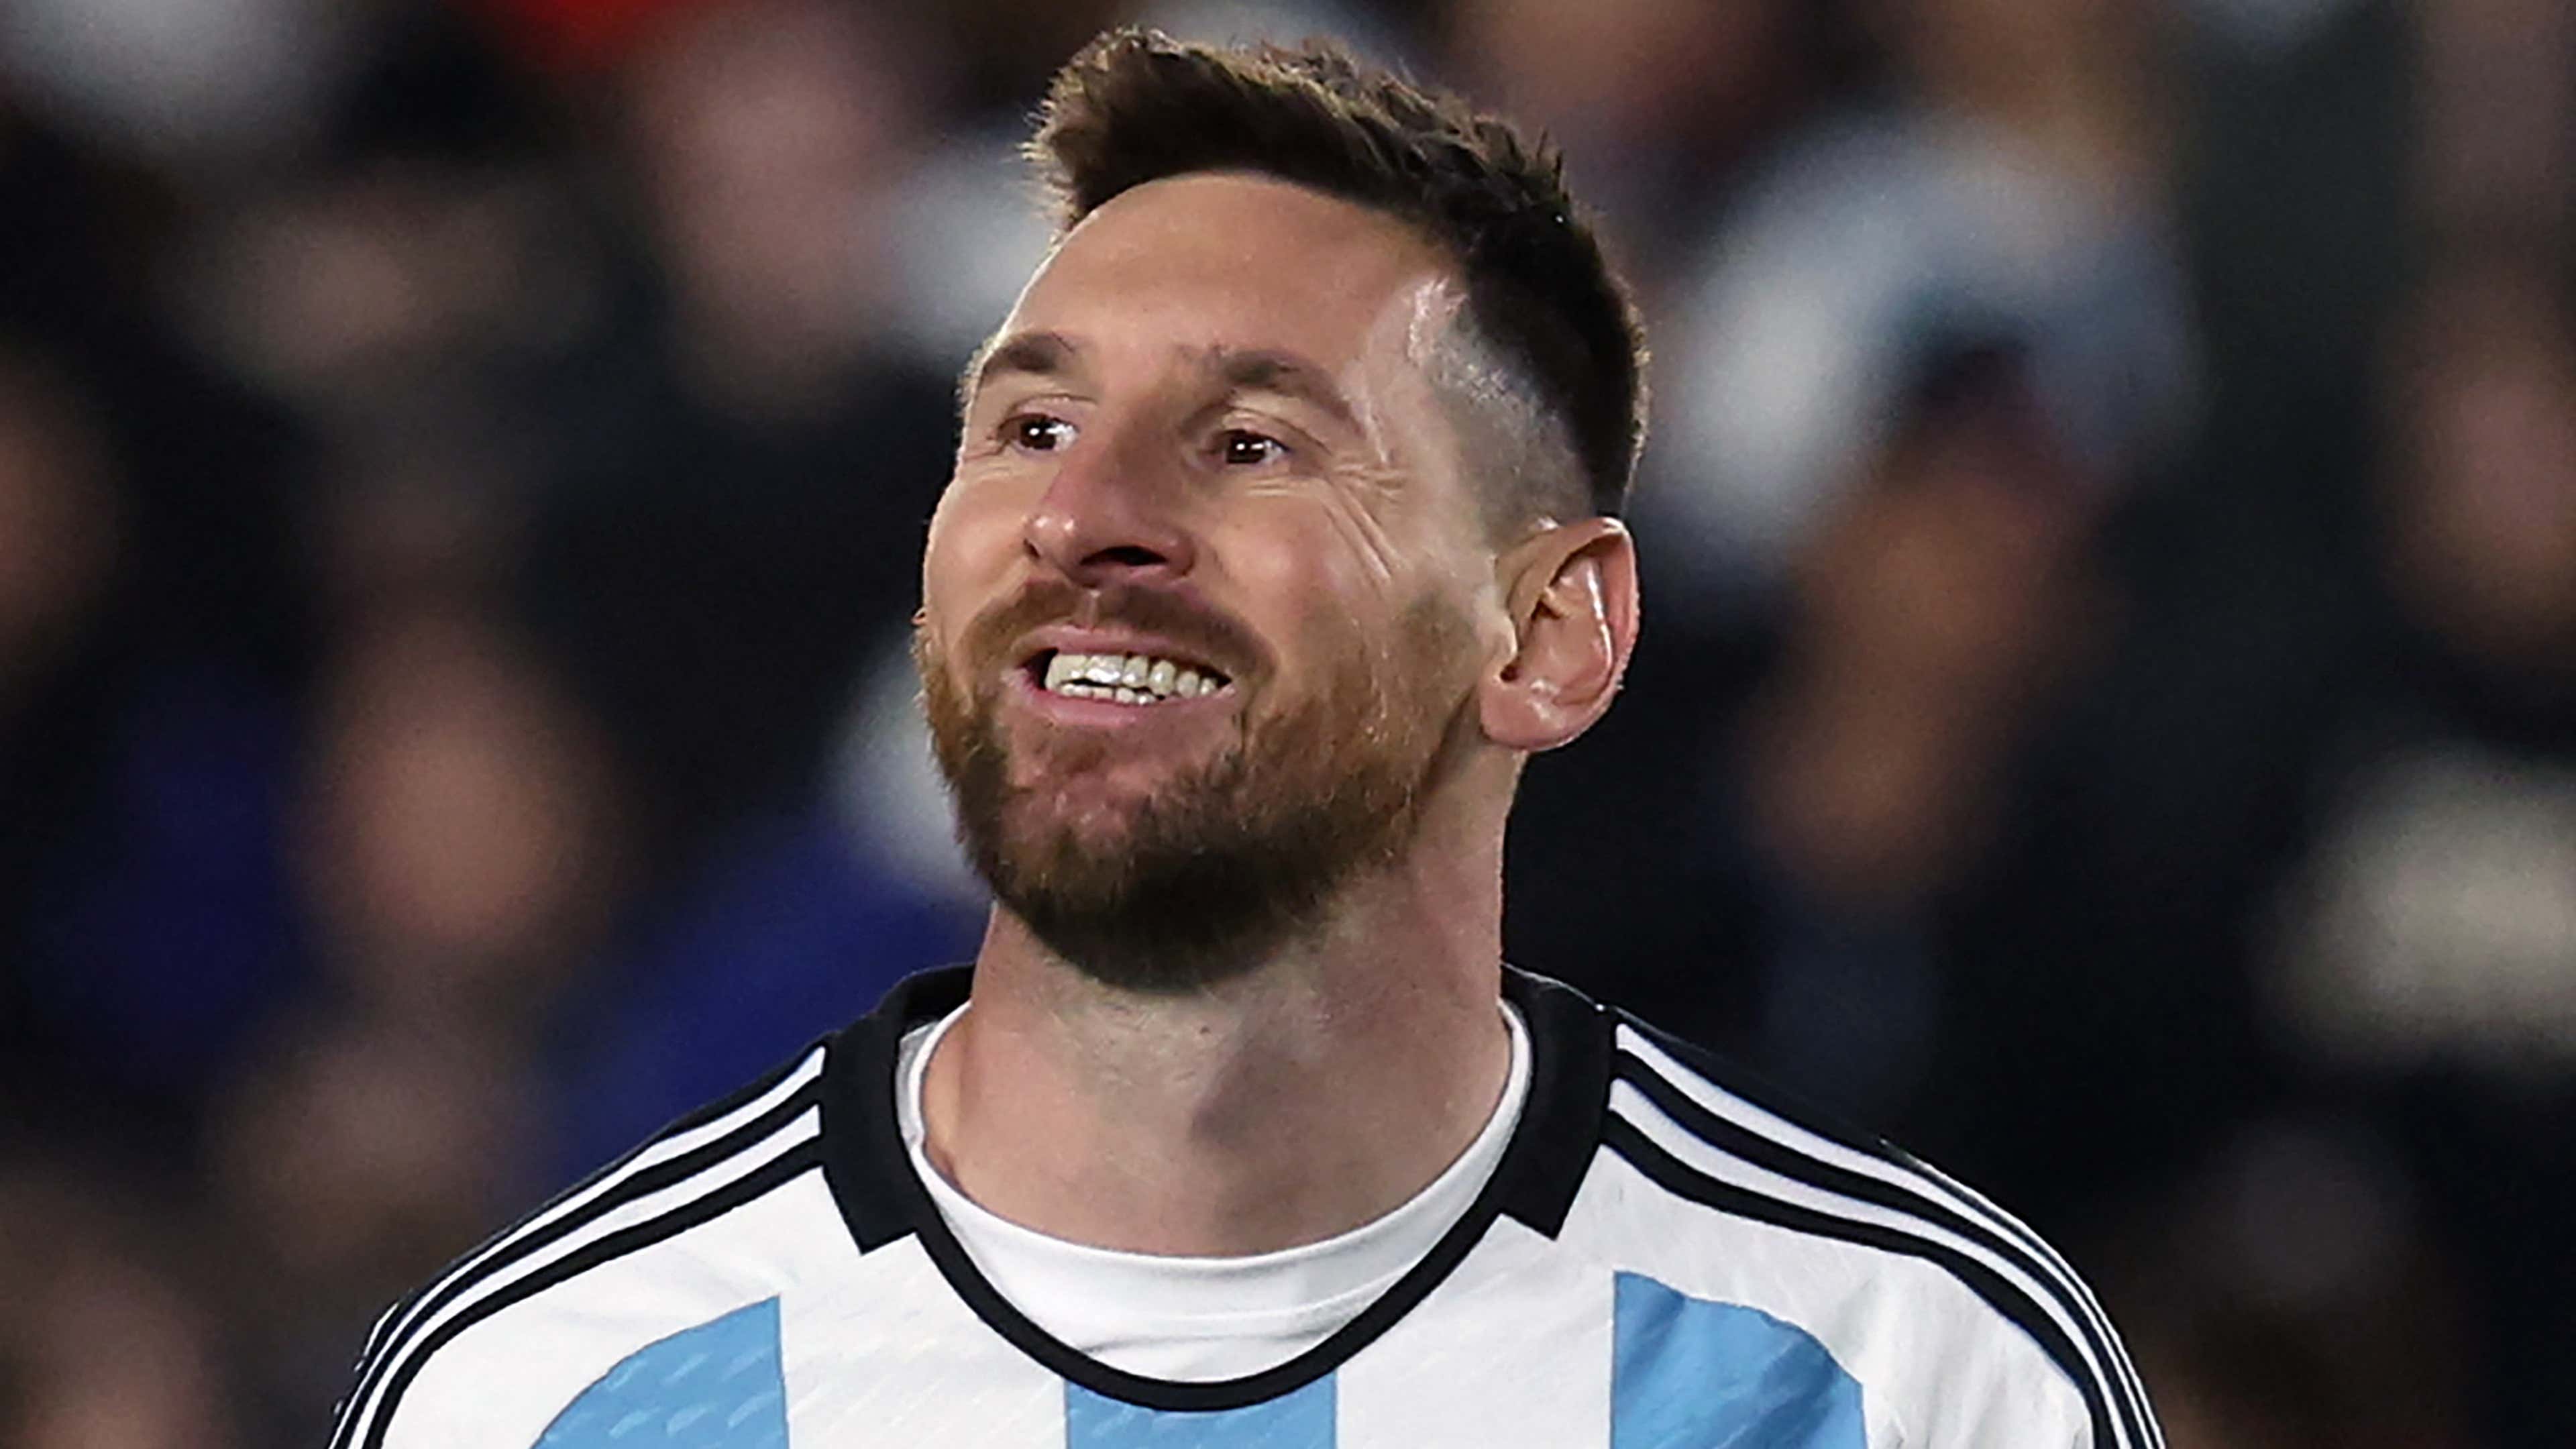 Messi vs Ronaldo: Let's Try To Settle The Debate - Never Manage Alone